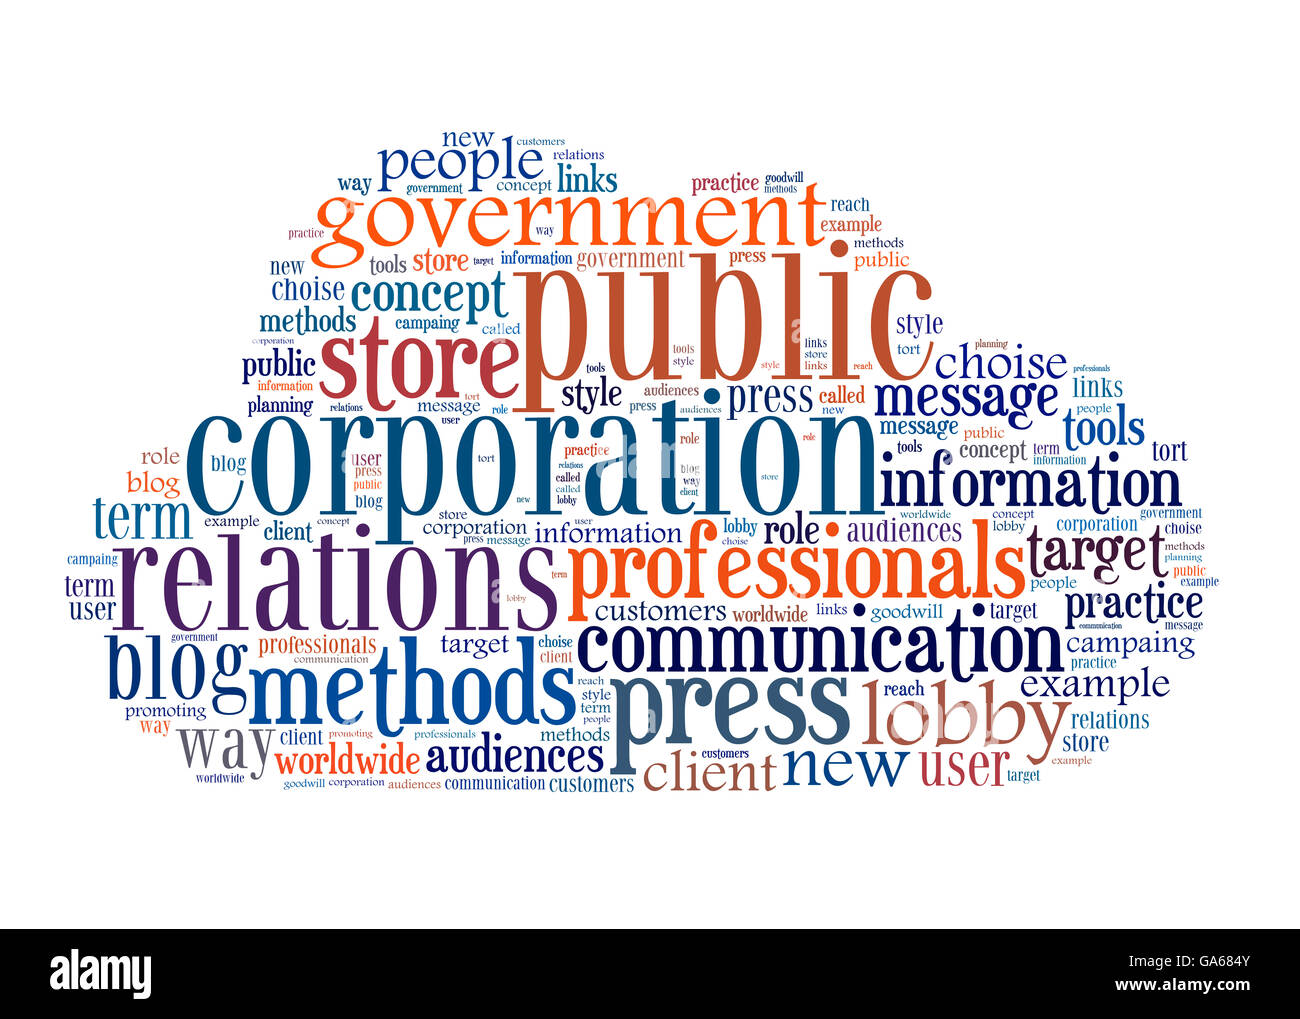 Concept of public relations, within a cloud words and tags Stock Photo